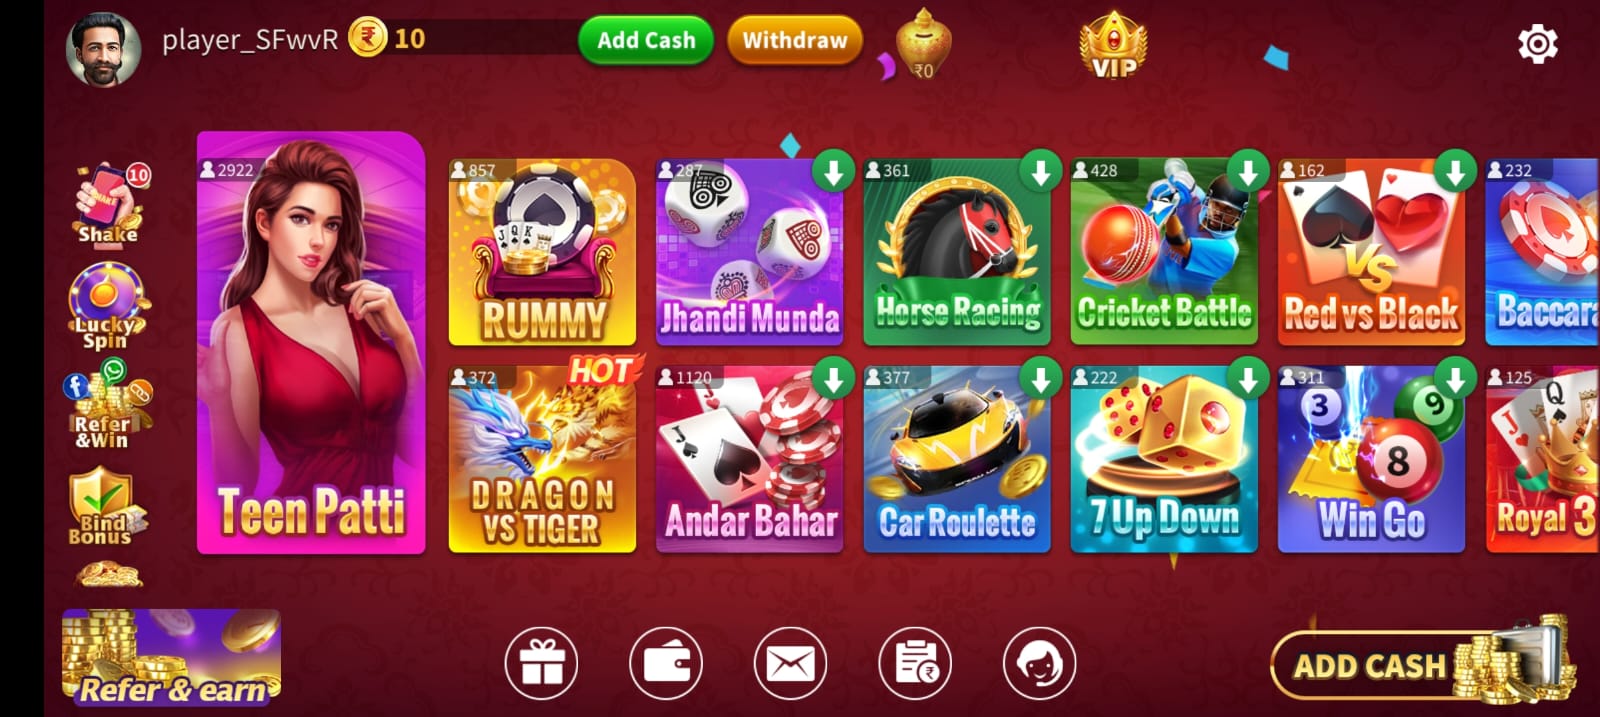 Available Games On Teen Patti Sweet App